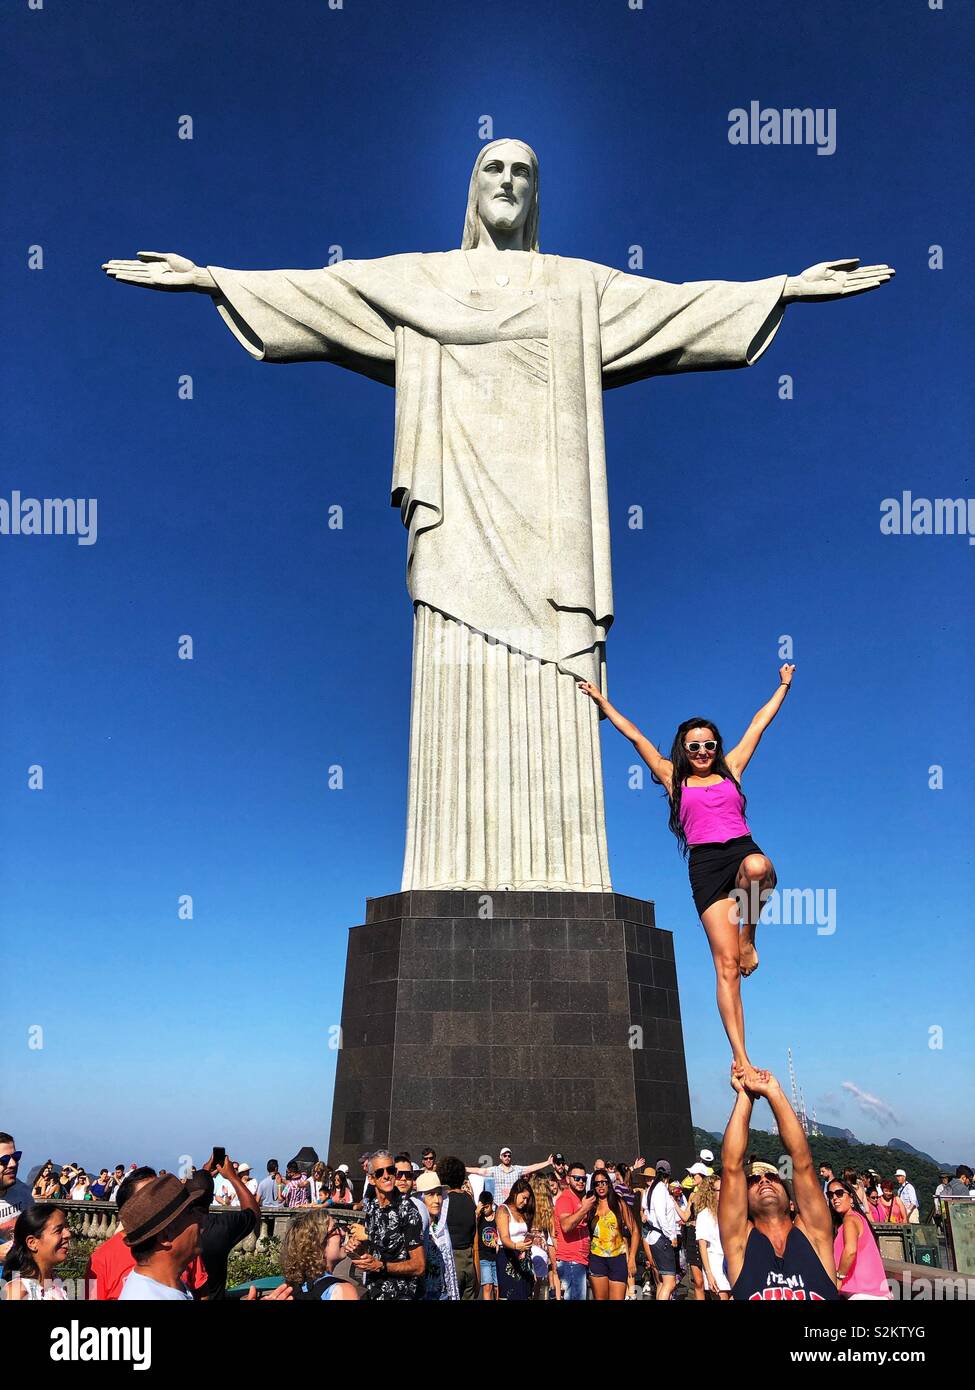 Taking posing to new heights in front of the iconic Christ the Redeemer statue in Rio de Janeiro, Brazil. Stock Photo